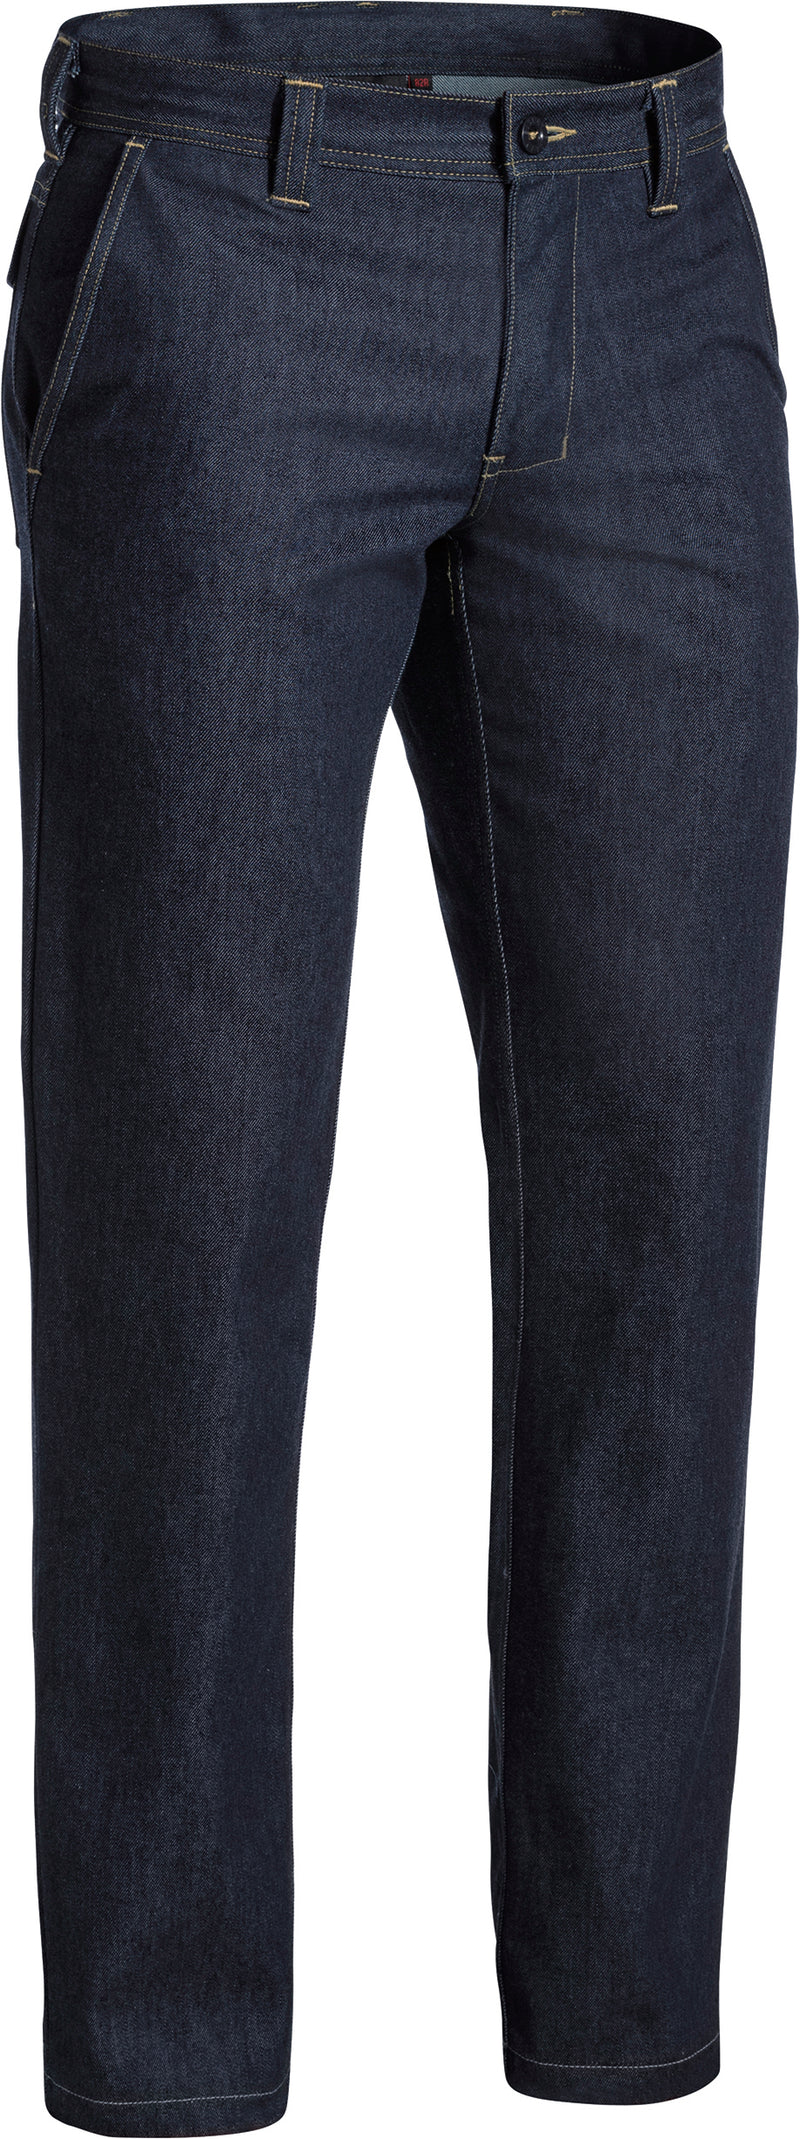 Load image into Gallery viewer, Wholesale BP8091 Bisley FR Denim Jeans - Stout Printed or Blank
